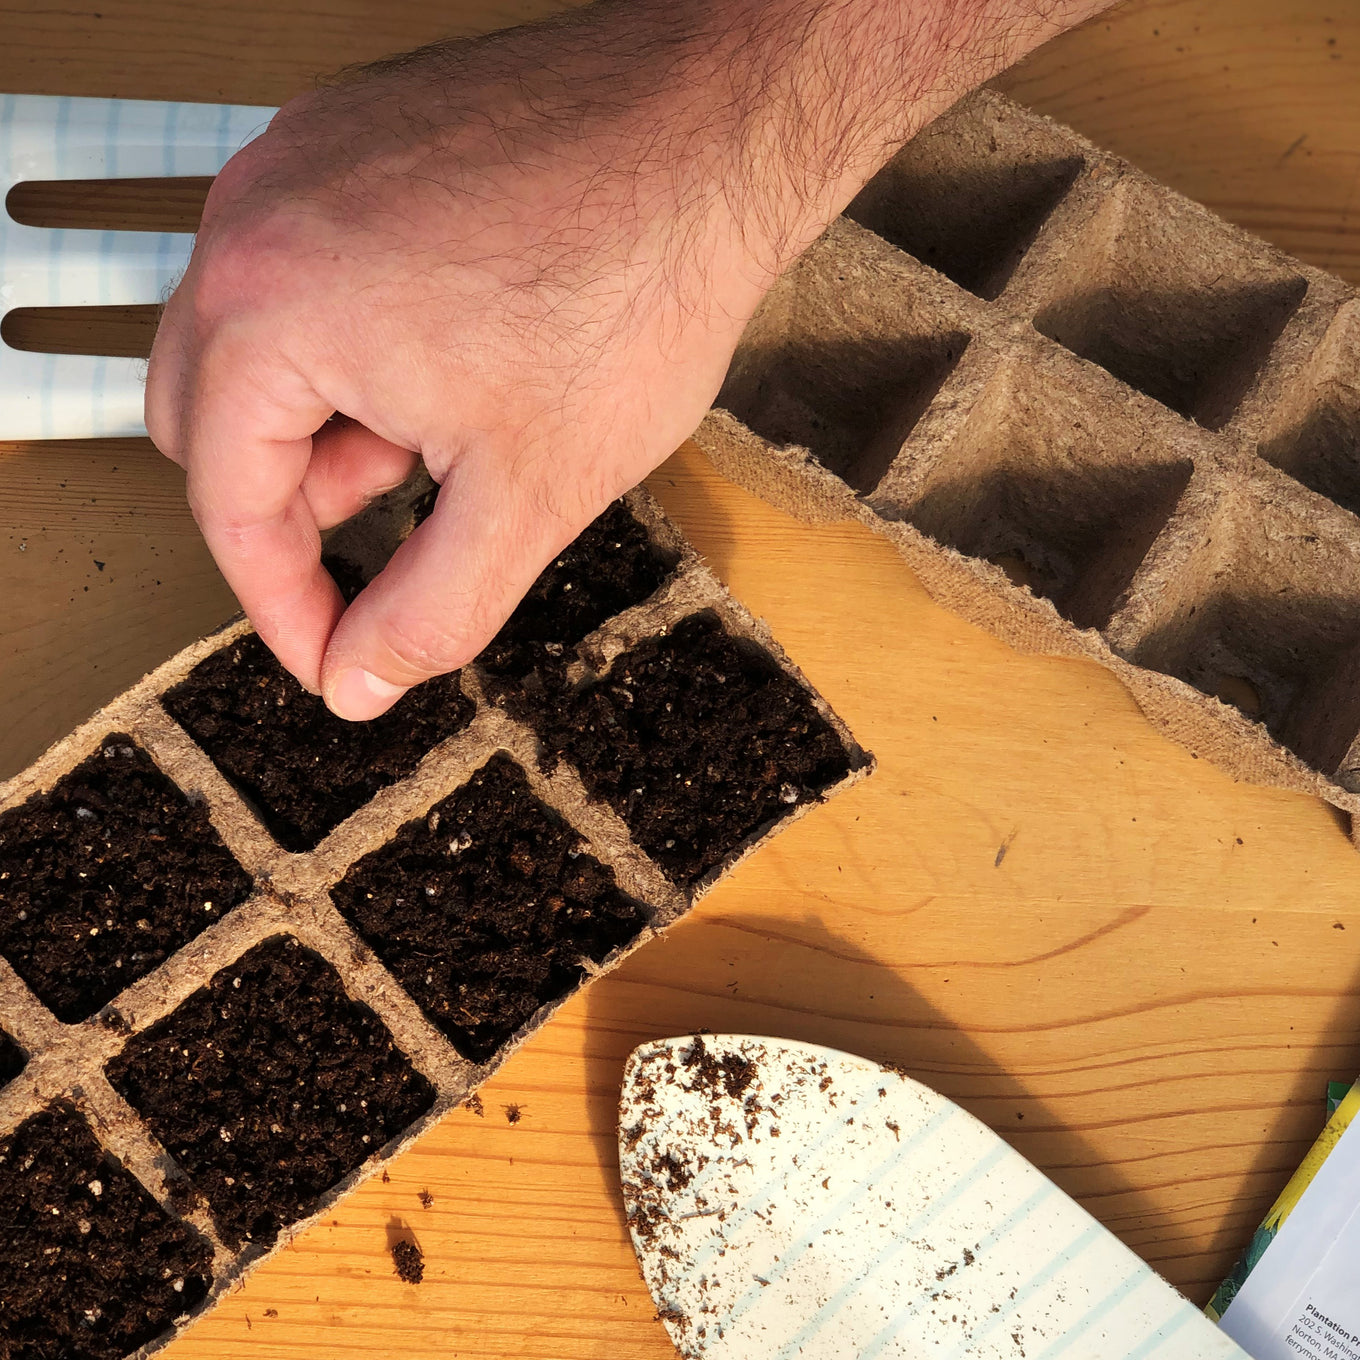 Starting Bush Type Spacemaster Cucumber Seeds in Jiffy biodegradable peat strip trays which easily tear apart when it's time to transplant cucumber seedlings outdoors. Plant seedling with tray.